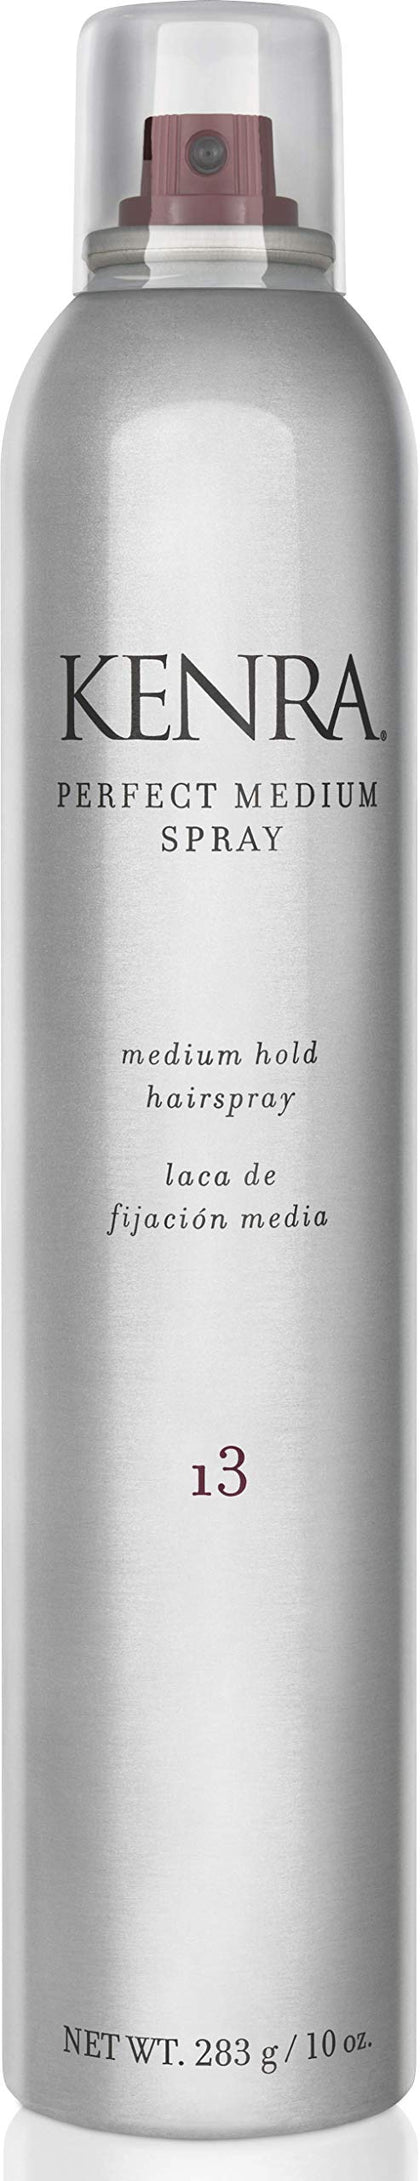 Kenra Perfect Medium Spray 13 80% | Provides Styling Control Without Stiffness | Medium Hold | Fast-Drying Formulation | High Shine Finish | All Hair Types | 10 oz